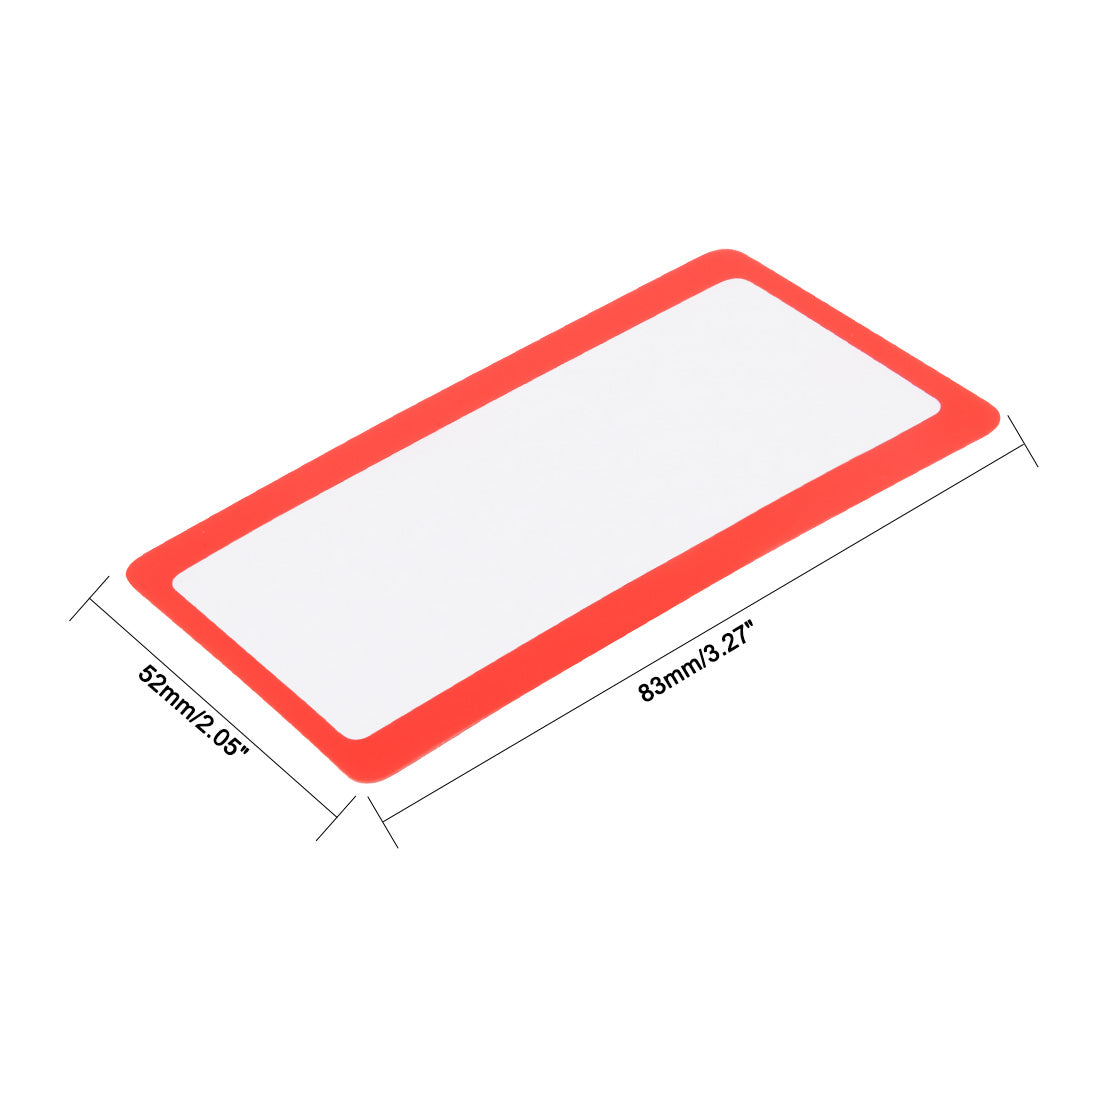 uxcell Uxcell Fresnel Lens Magnifier 75mm x 40mm 3X 300% Credit Card Magnifier for Seniors Macular Degeneration Red 6pcs